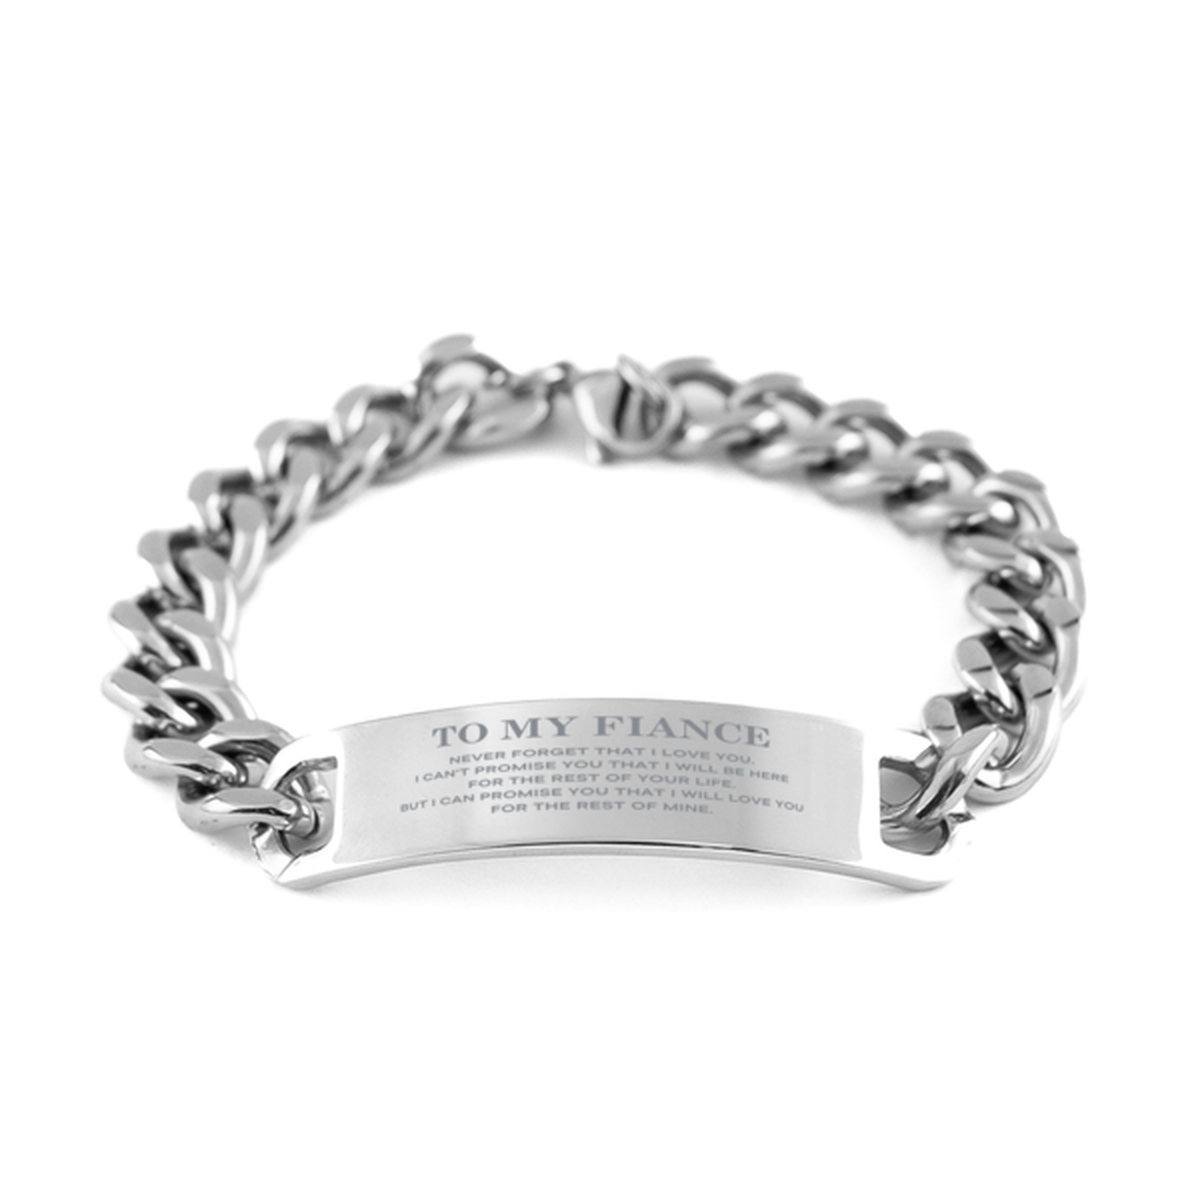 To My Fiance Gifts, I will love you for the rest of mine, Love Fiance Bracelet, Birthday Christmas Unique Cuban Chain Stainless Steel Bracelet For Fiance